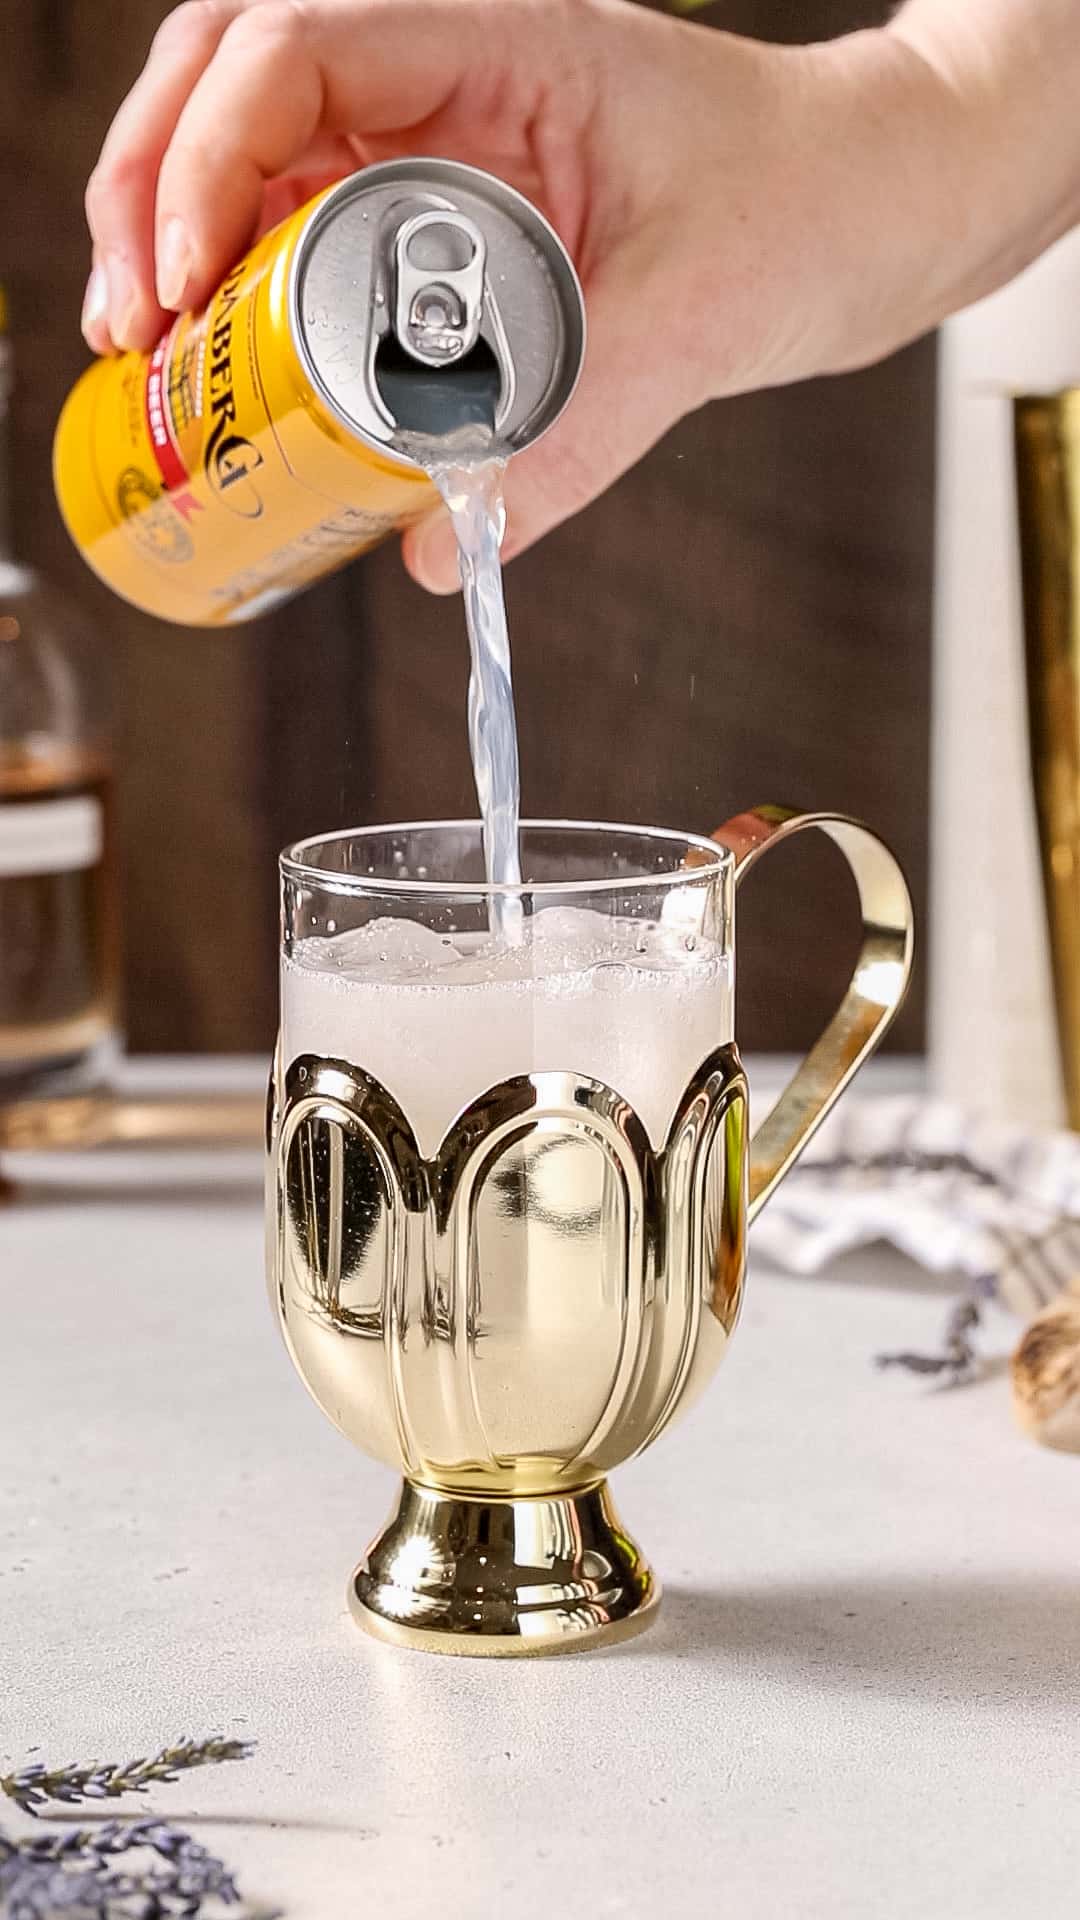 Hand pouring ginger beer into a cocktail mug filled with ice and some other liquid.